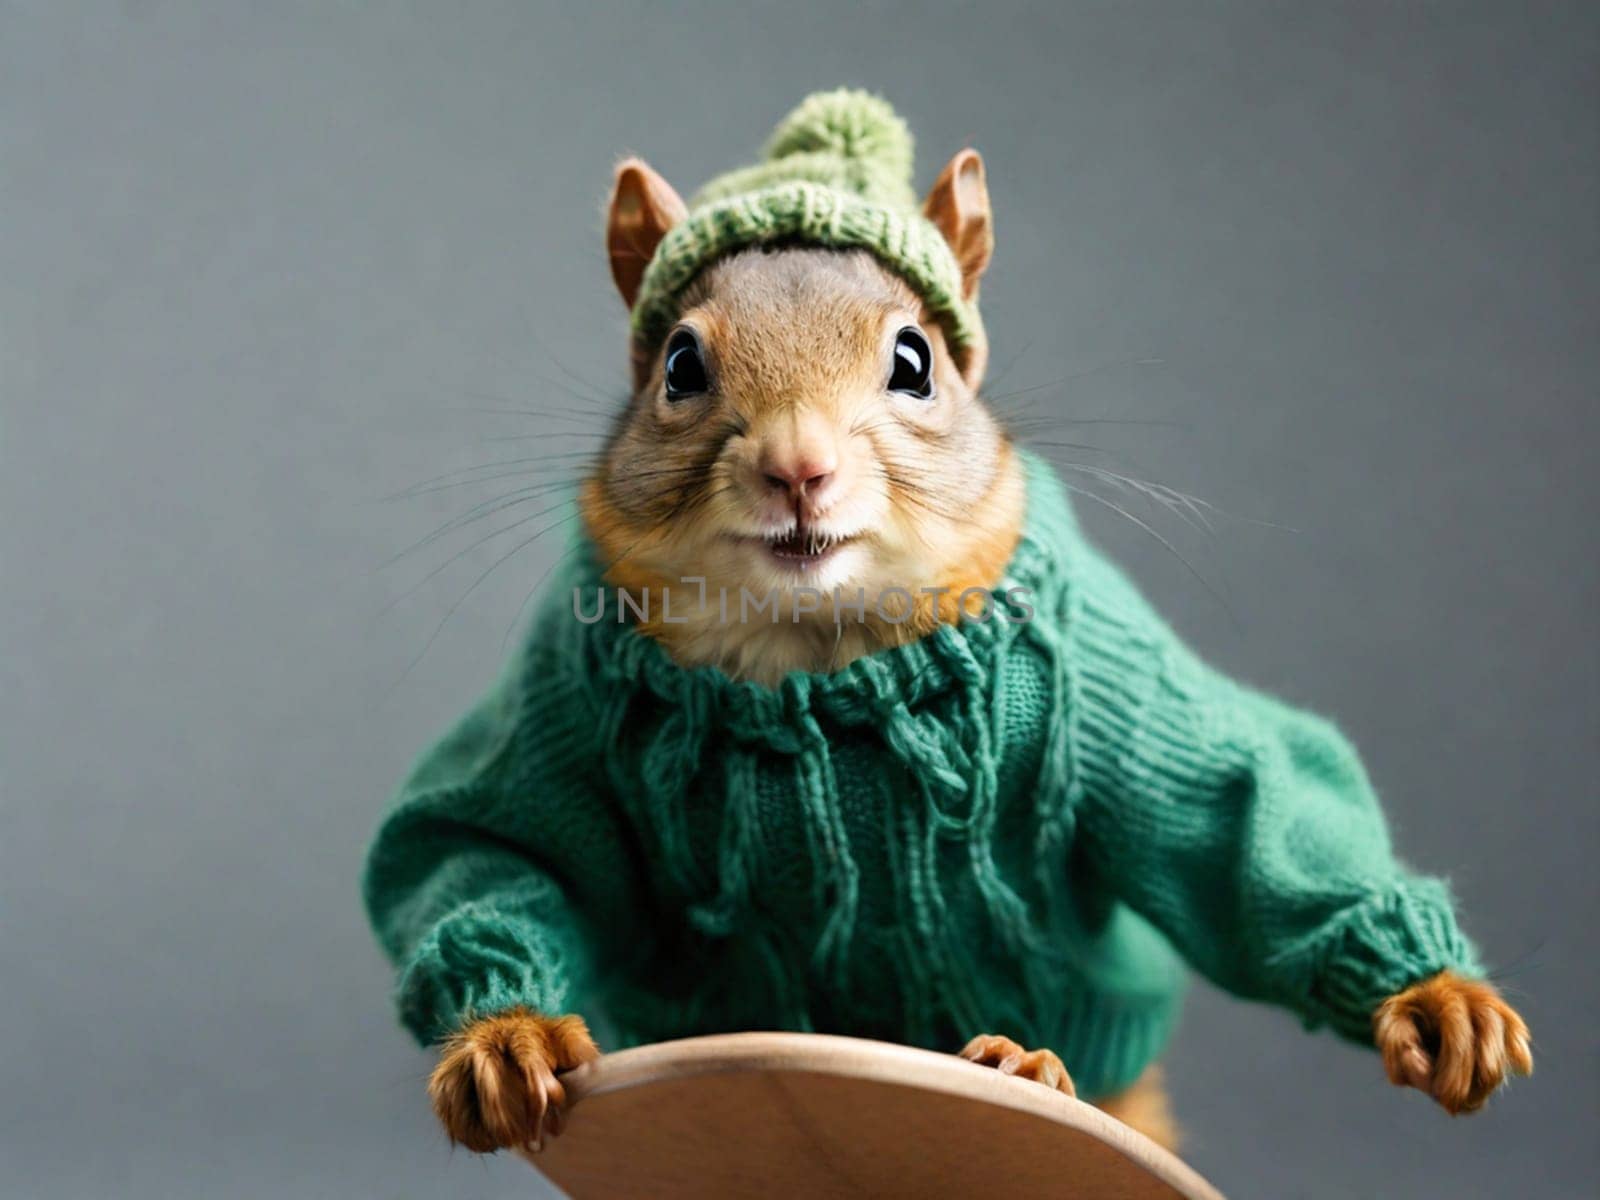 Funny squirrel in a green sweater and hat on a skateboard. by Ekaterina34